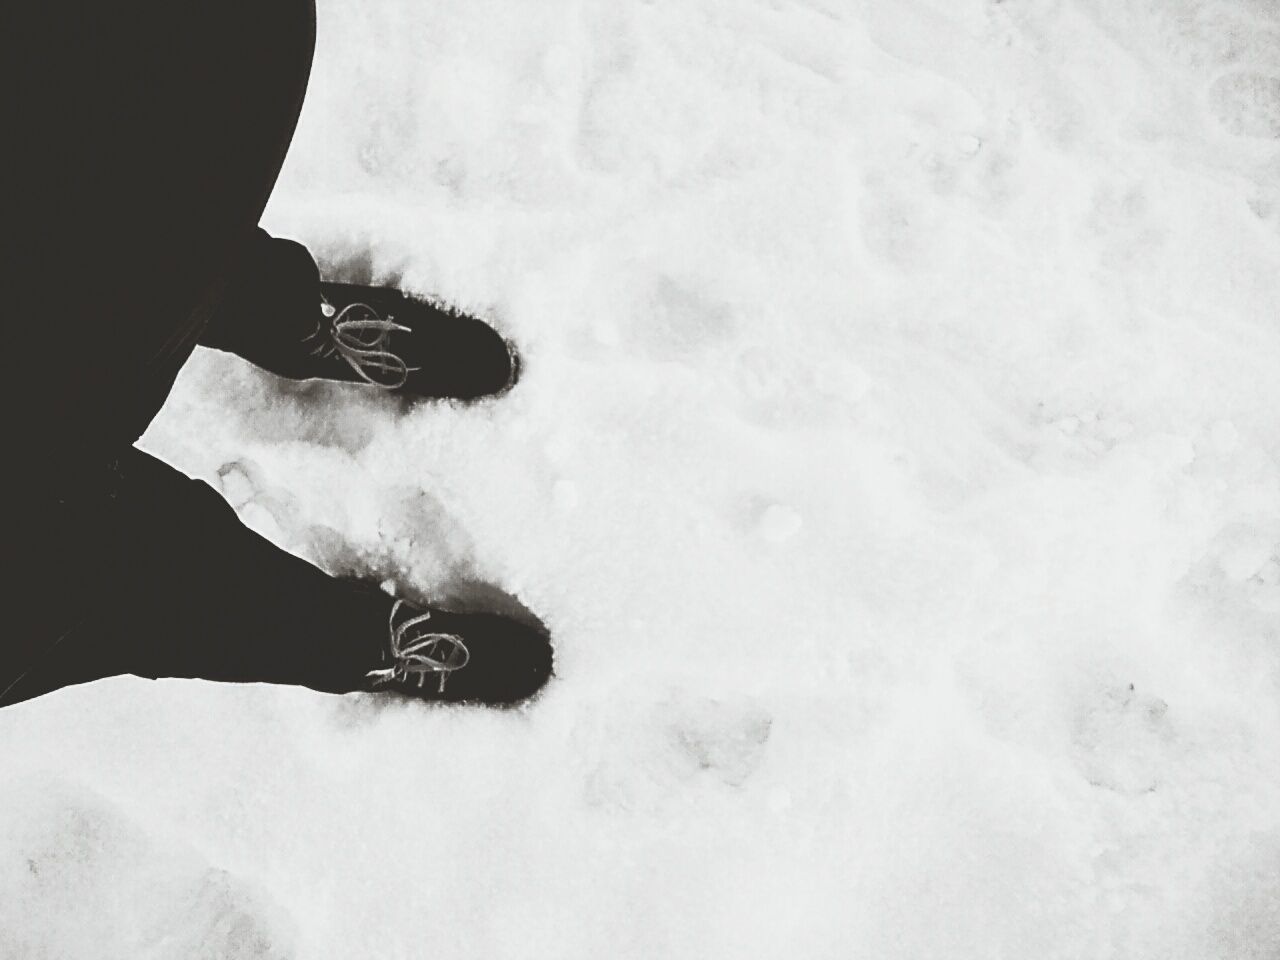 lifestyles, leisure activity, low section, snow, winter, person, cold temperature, men, shoe, high angle view, standing, unrecognizable person, season, holding, human foot, covering